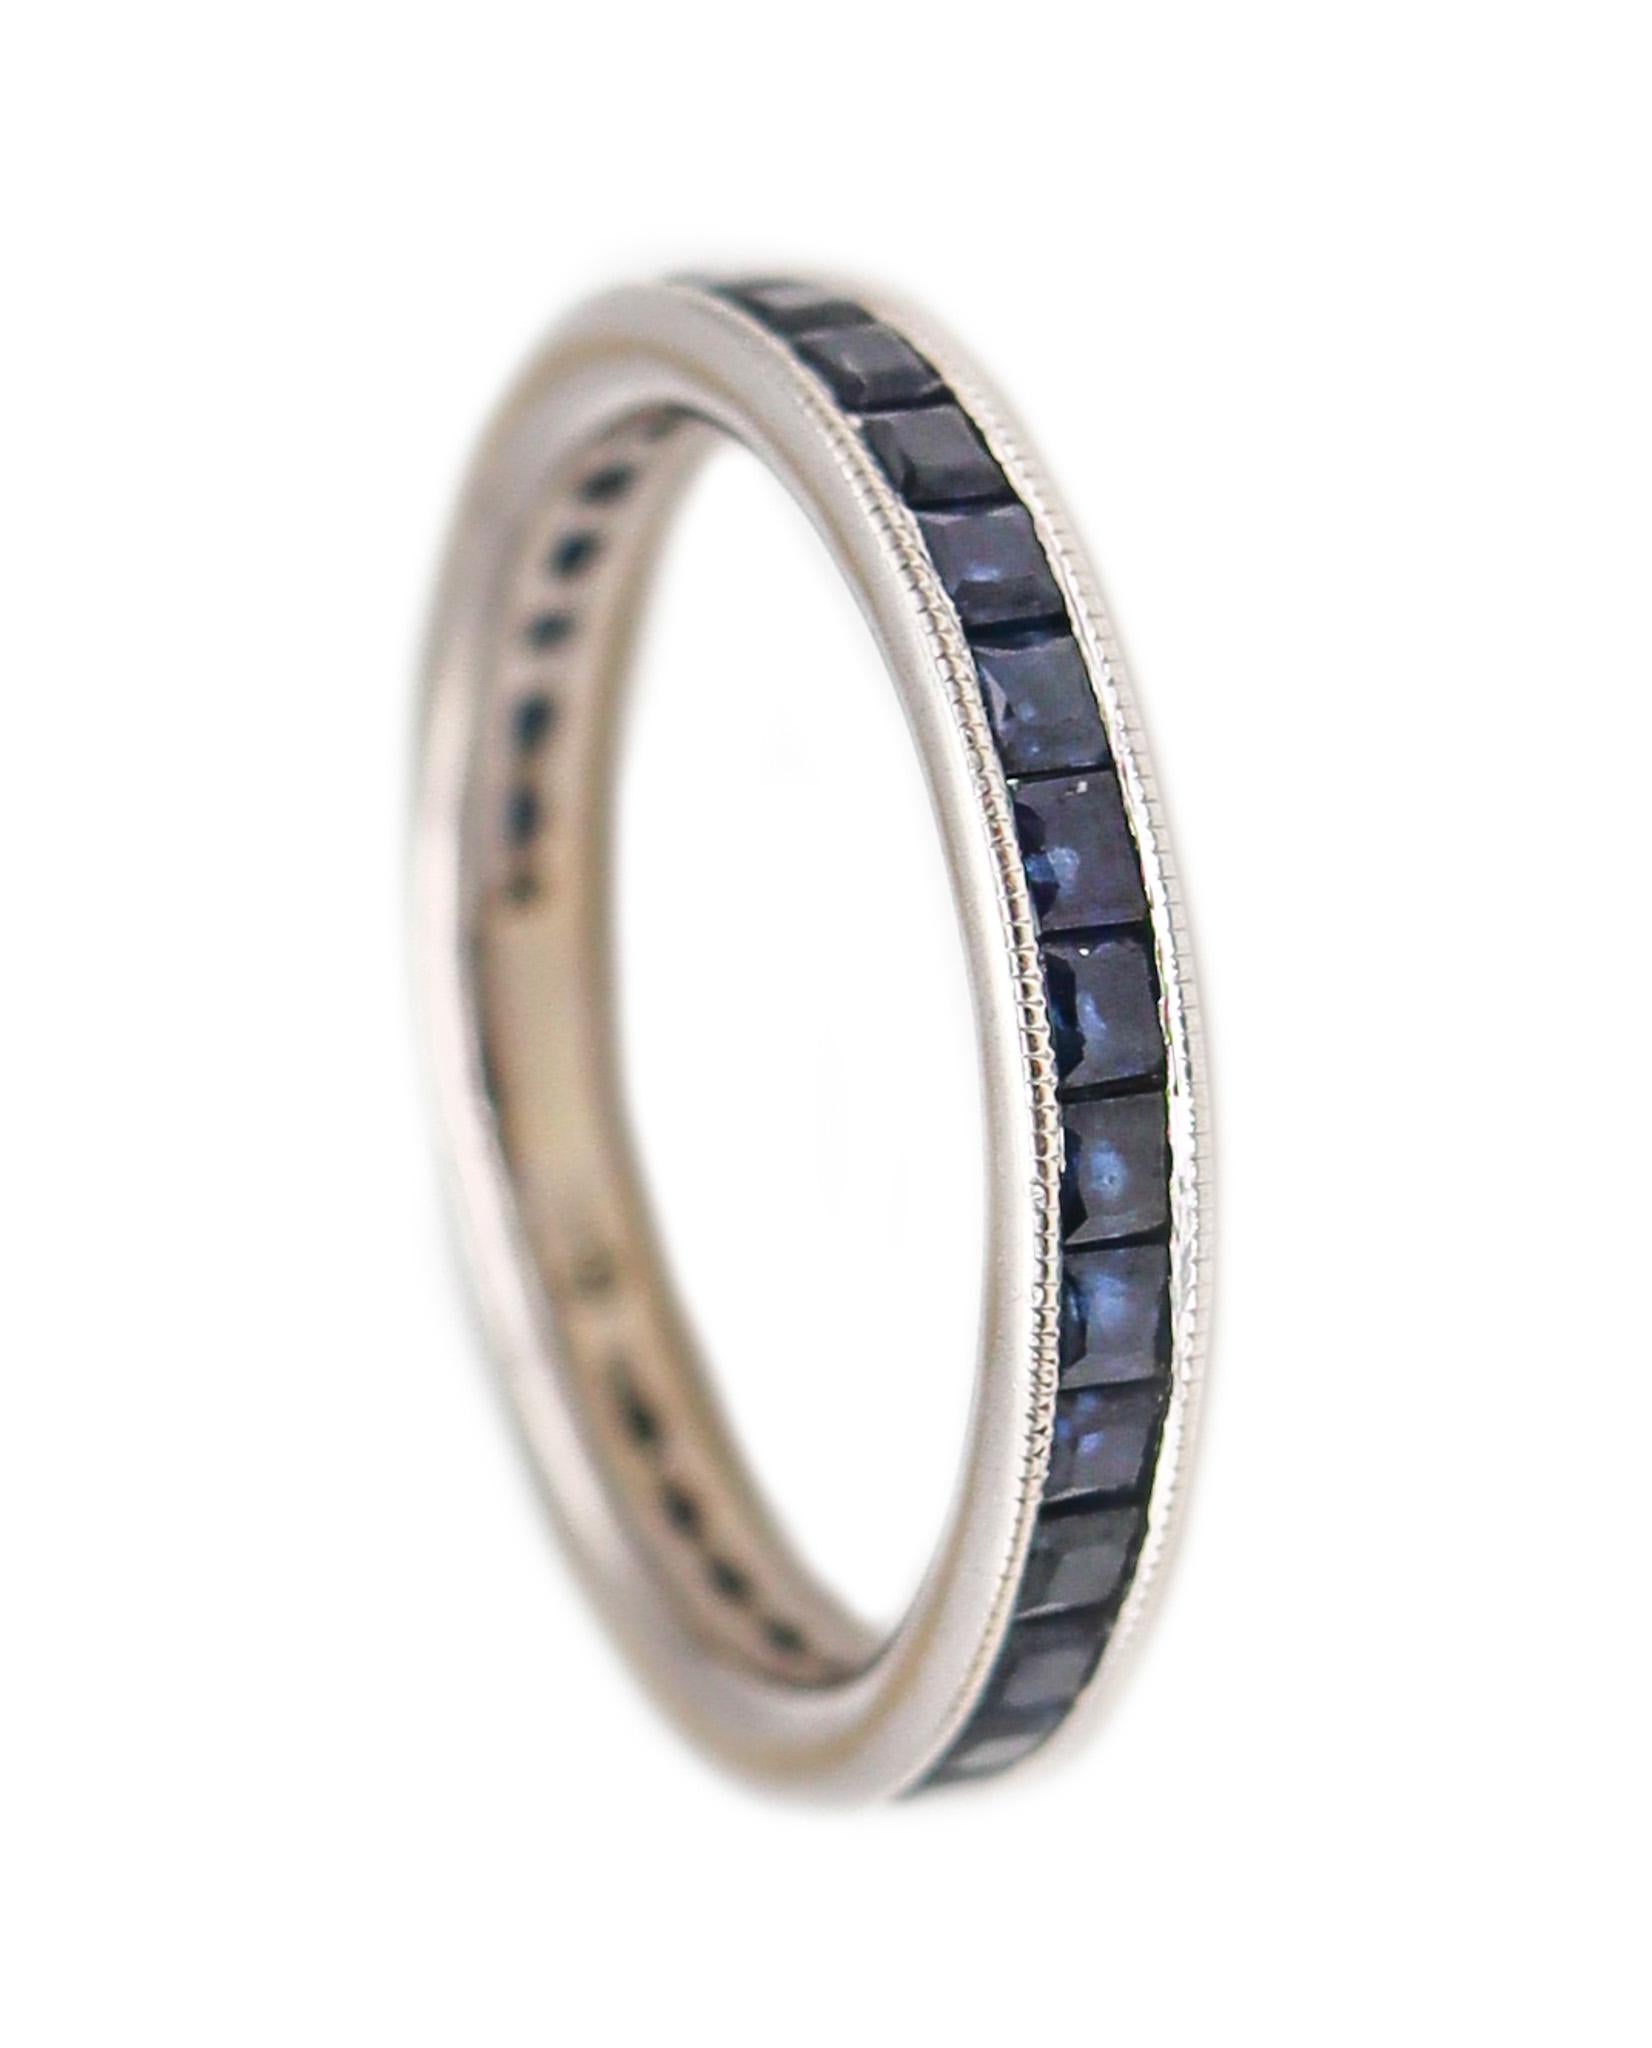 Eternity Band Ring in 14 Karat White Gold with 3.45 Ct of Natural Blue Sapphires